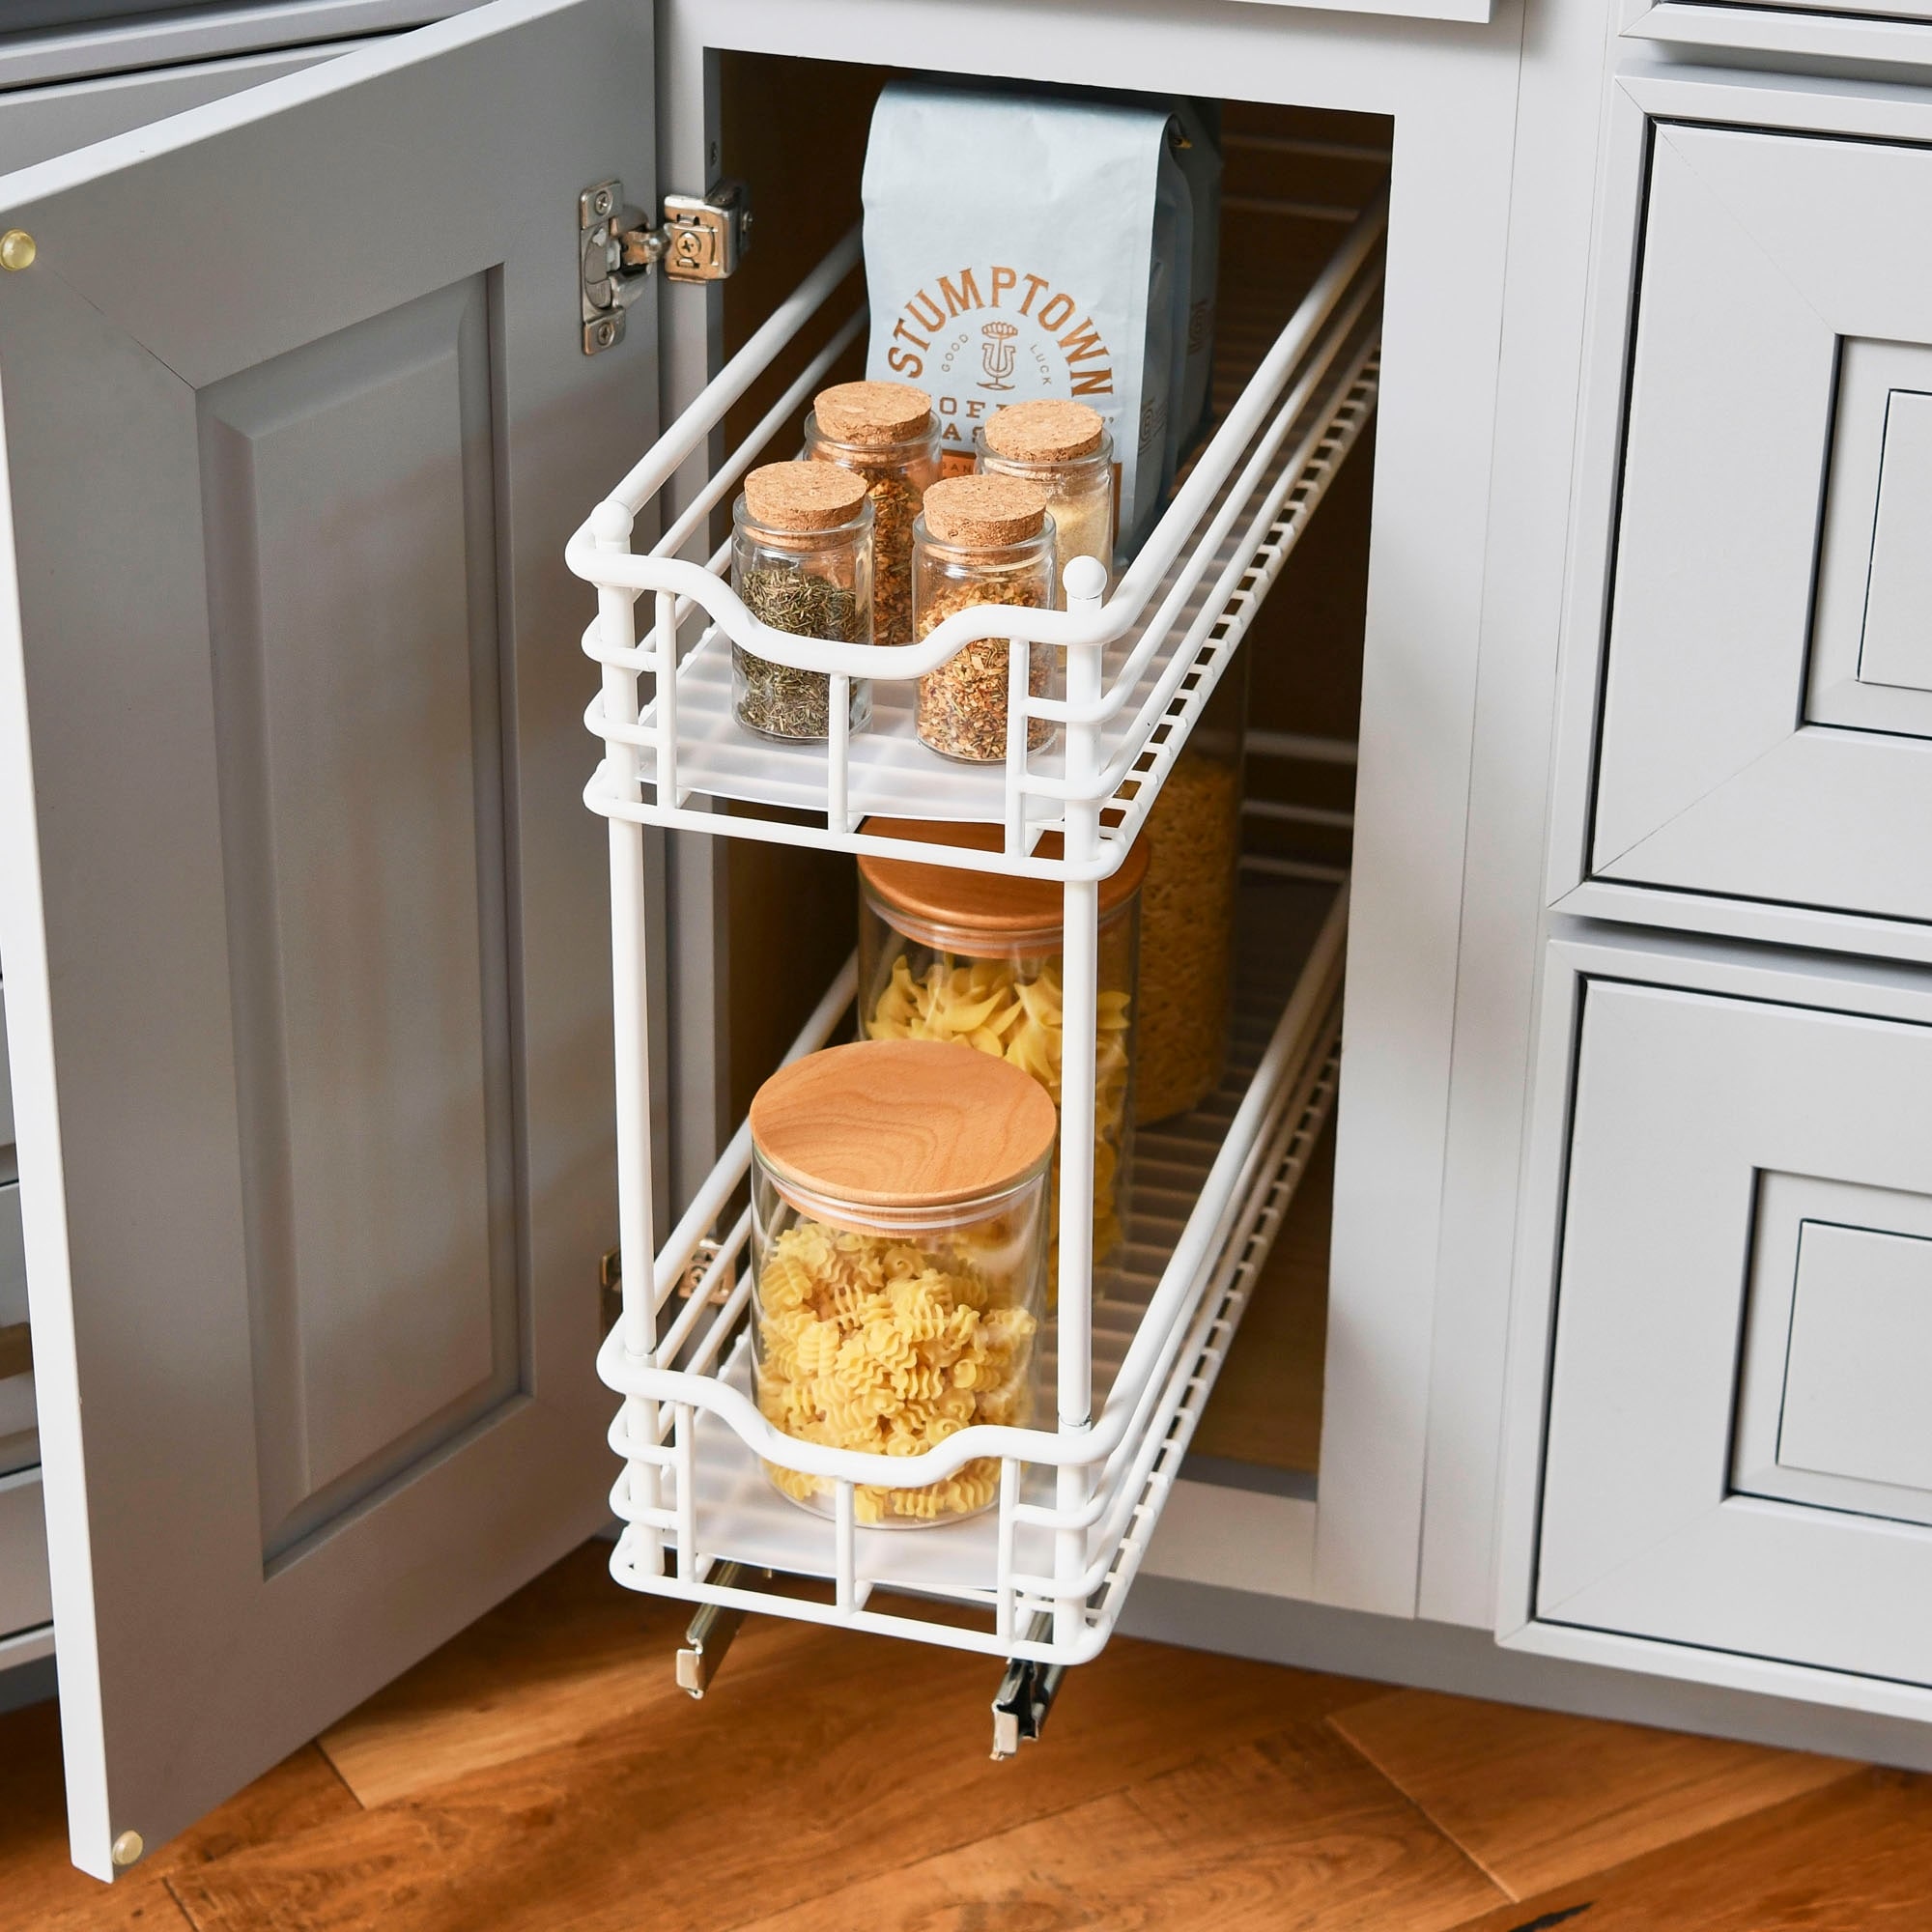 https://ak1.ostkcdn.com/images/products/is/images/direct/0705282c765ec556861f3e9839e239404fcd0d9f/Narrow-Two-Sliding-Cabinet-Organizer%2C-Great-for-Slim-Cabinets-in-Kitchen.jpg